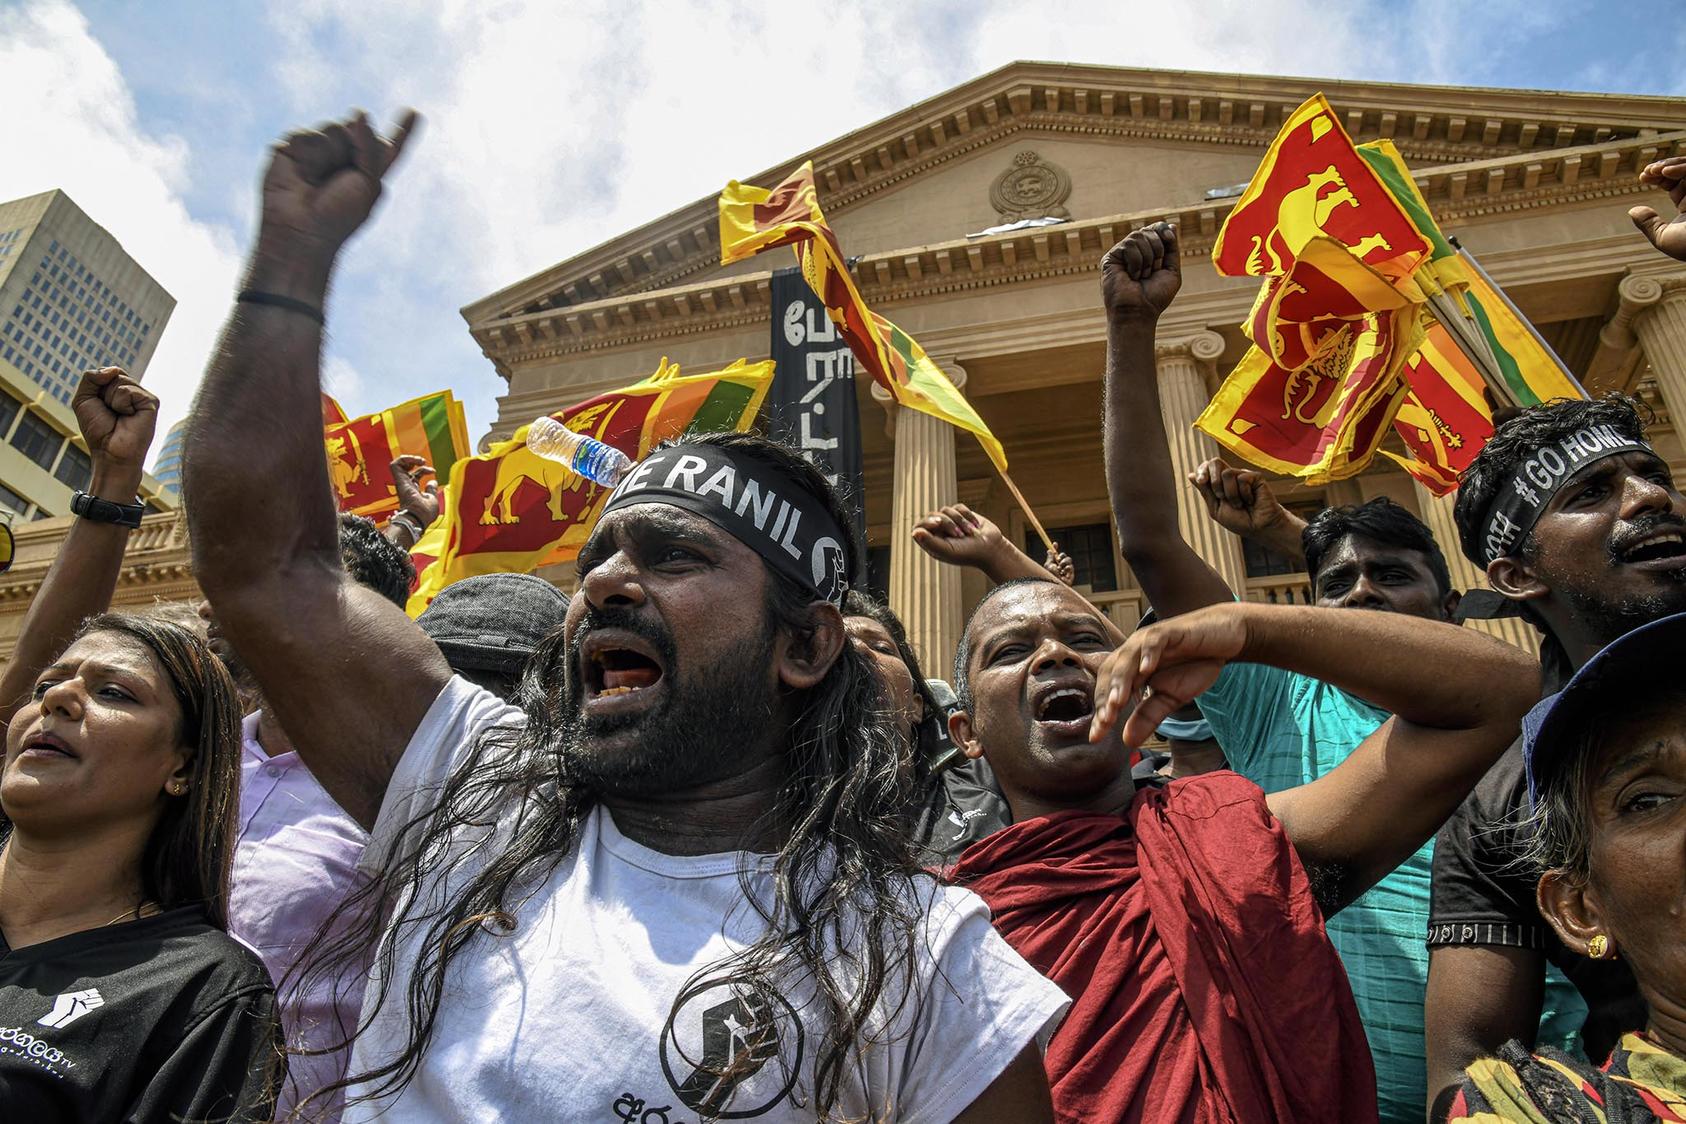 Protesters in Colombo, Sri Lanka, rally against Ranil Wickremesinghe after he was elected by lawmakers in Parliament as the new president on Wednesday, July 20, 2022. Wickremesinghe, a canny political survivor with ties to the exiled former president, inherits a nation in deep crisis. (Atul Loke/The New York Times)